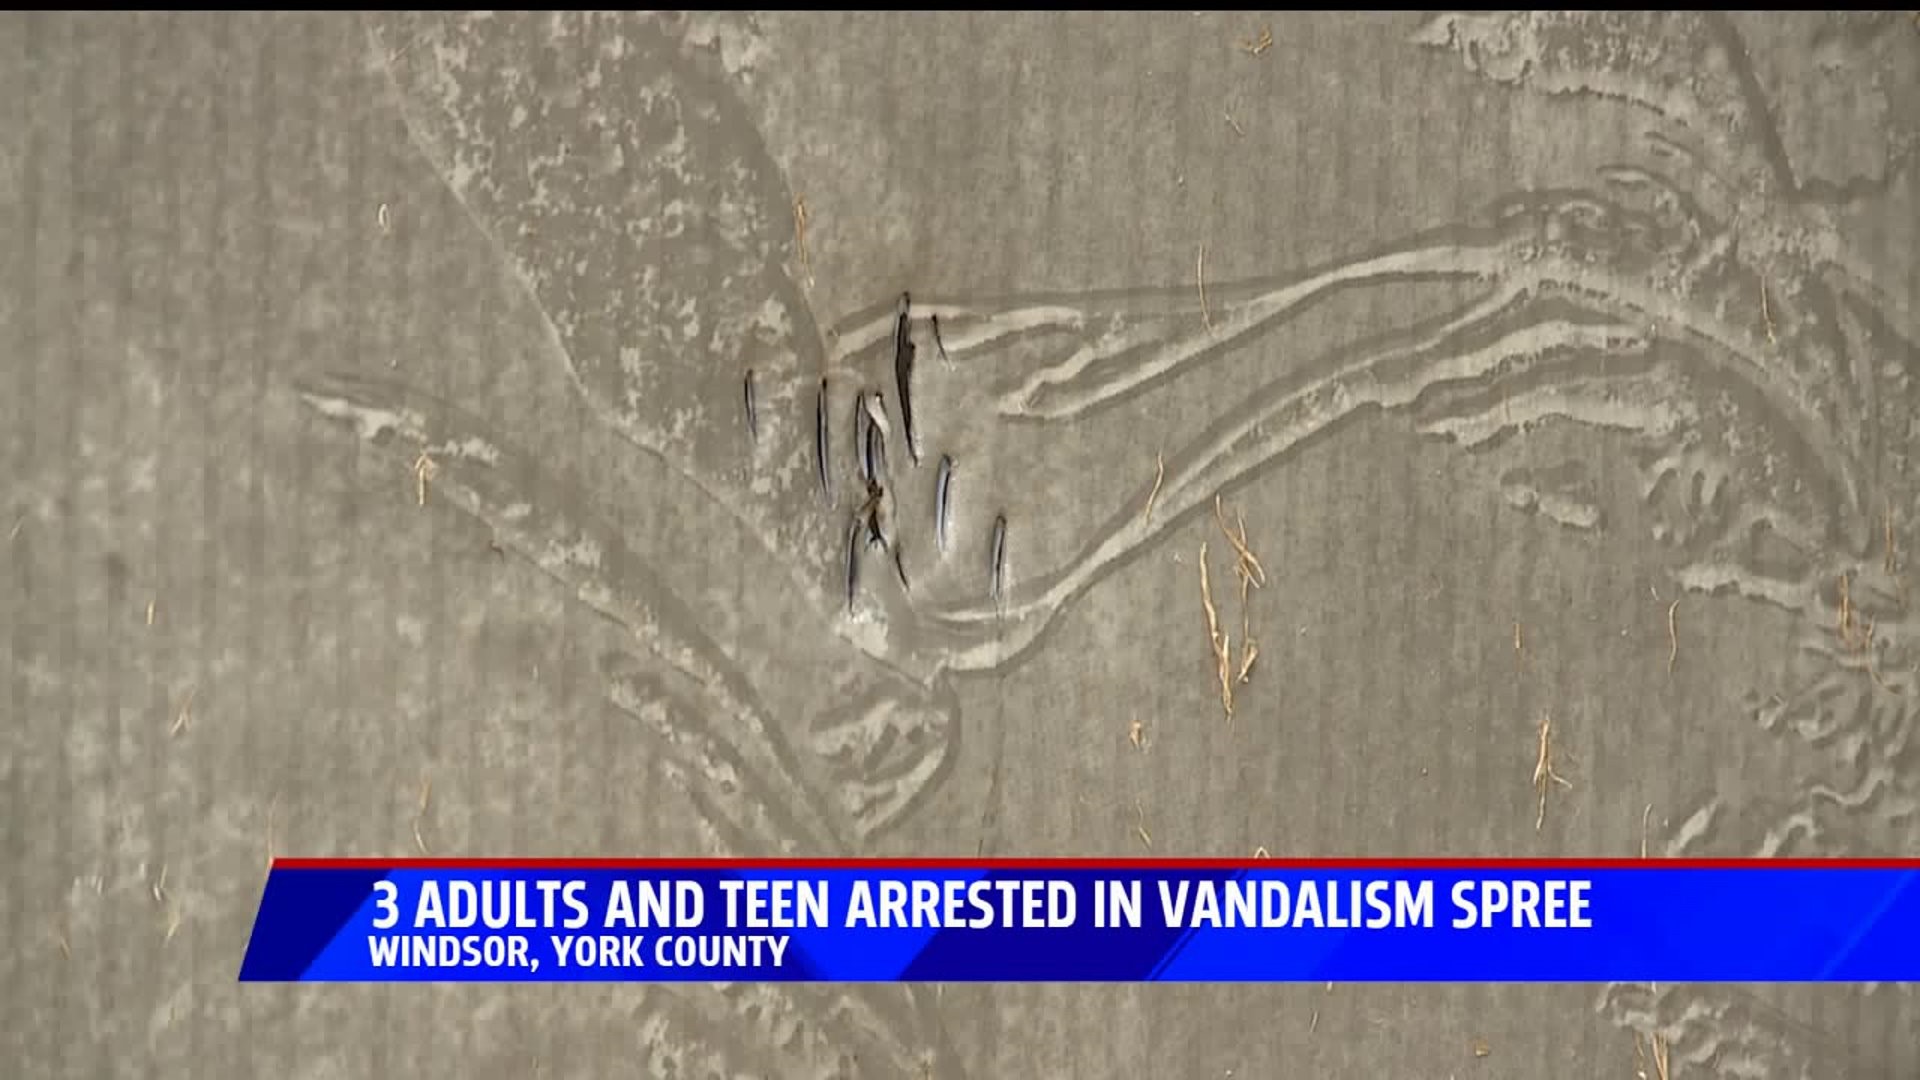 Red Lion vandalism suspects arrested; tens of thousands of dollars in damage caused